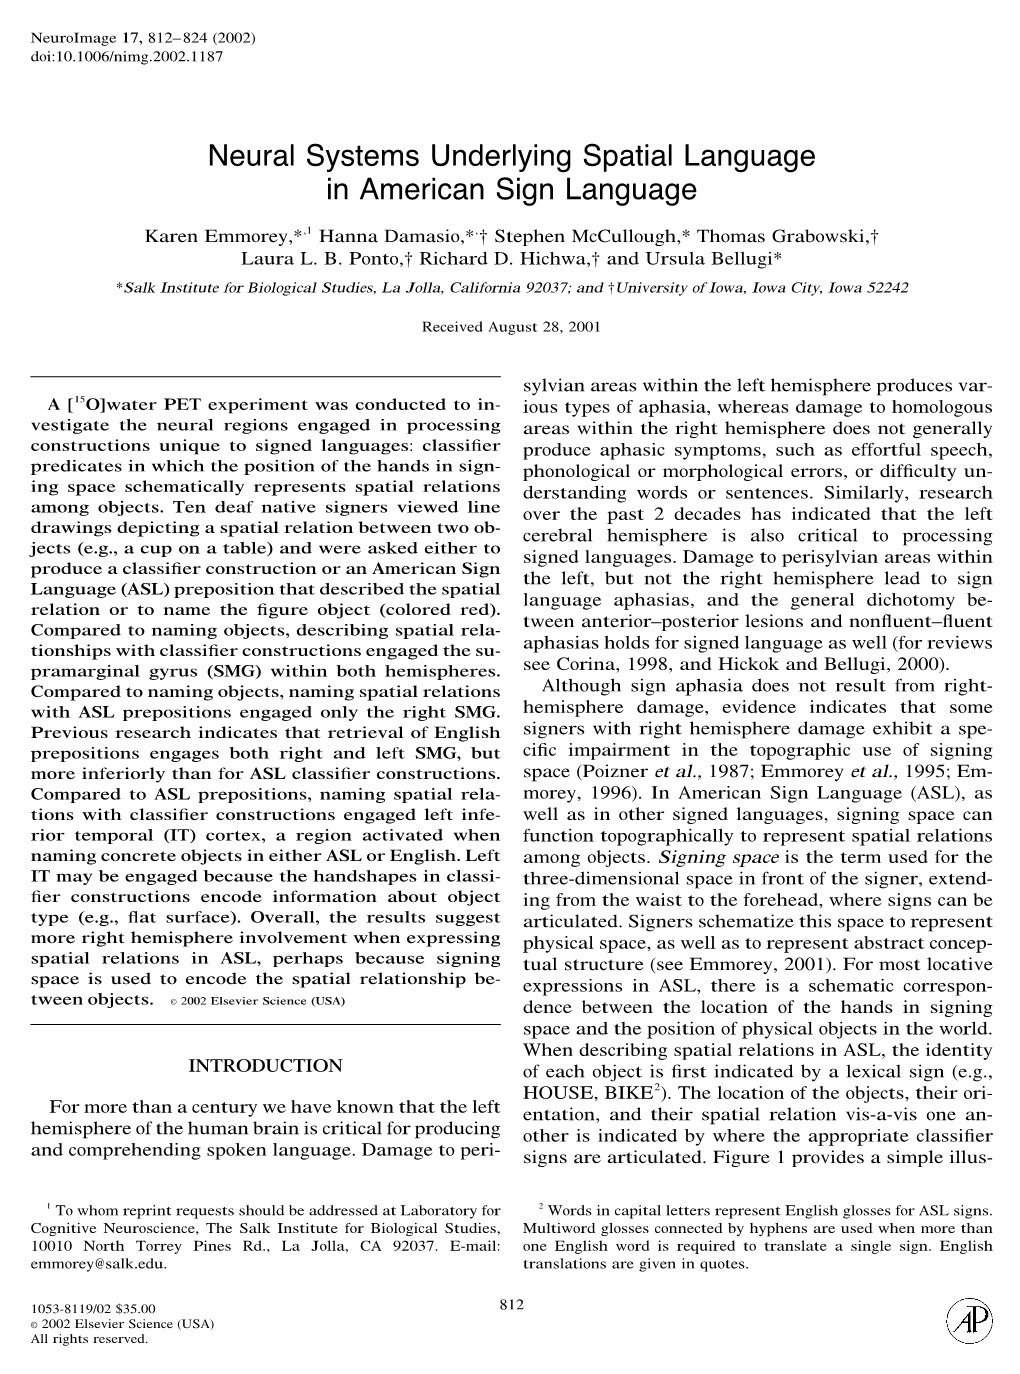 Neural Systems Underlying Spatial Language in American Sign Language